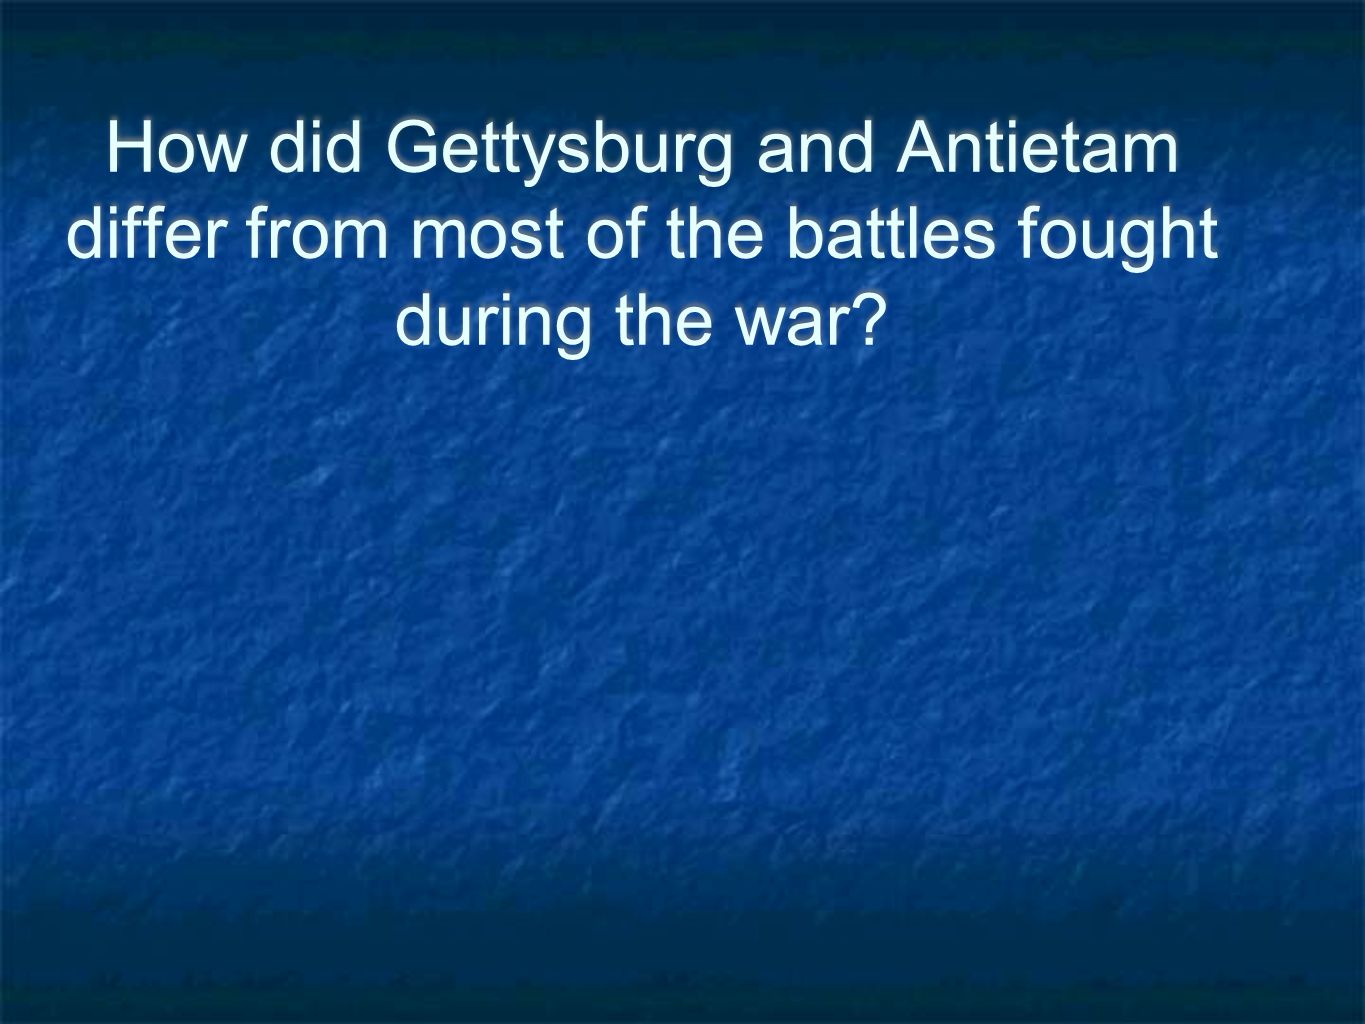 How did Gettysburg and Antietam differ from most of the battles fought during the war